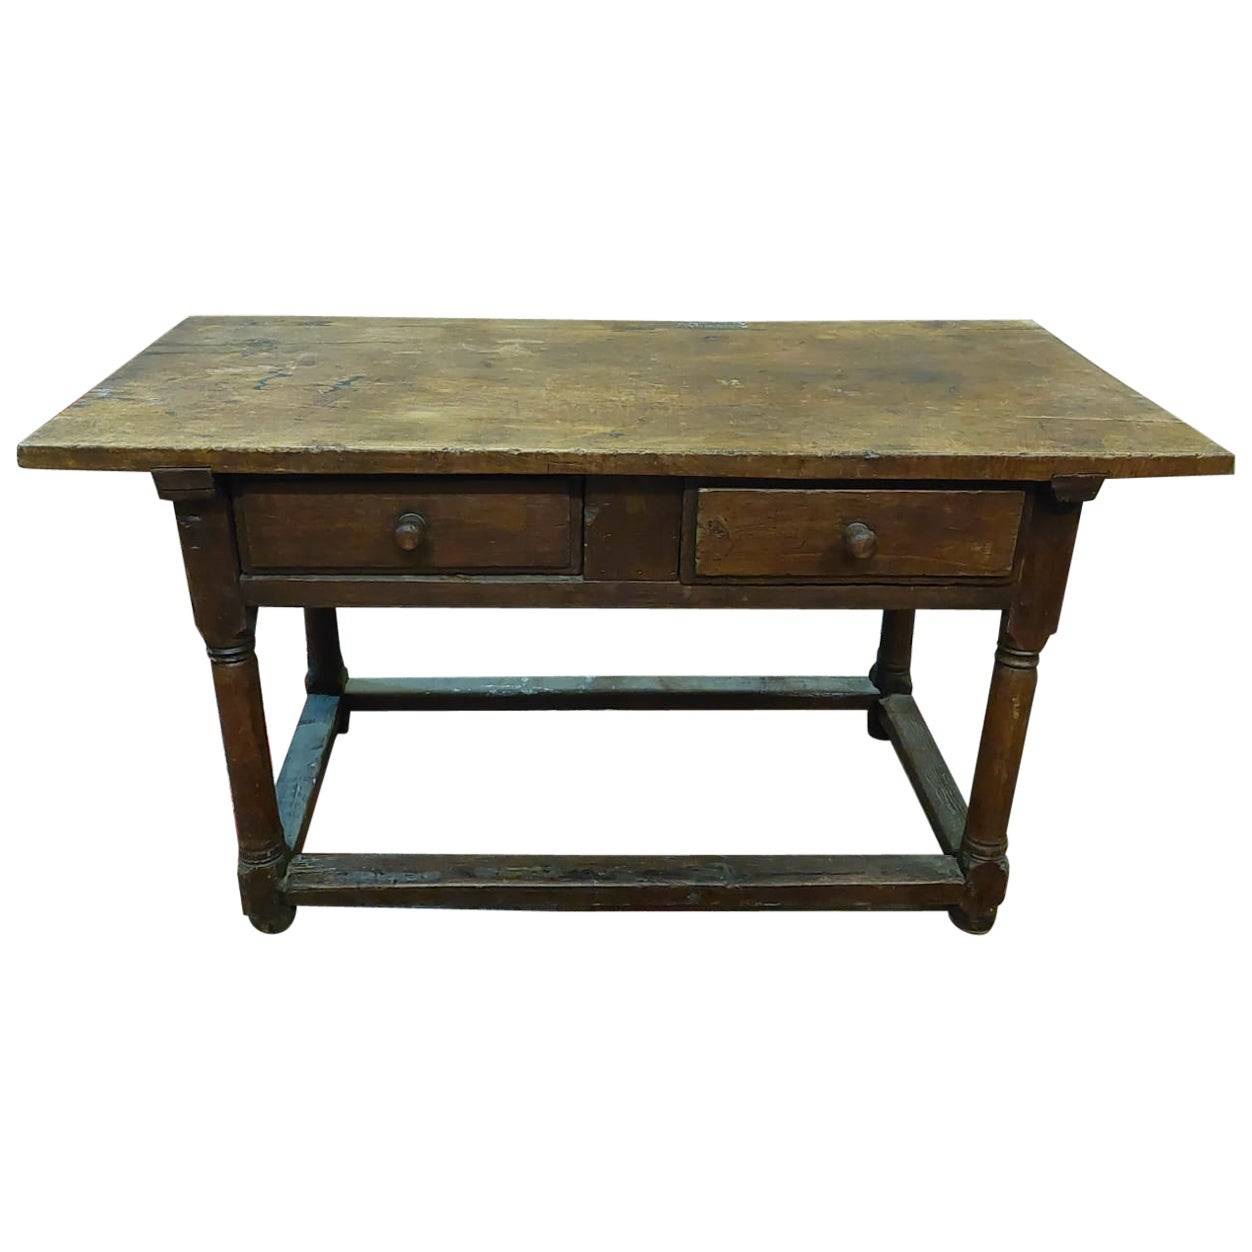 Antique Chestnut Table with Drawers, 17th Century Italy For Sale